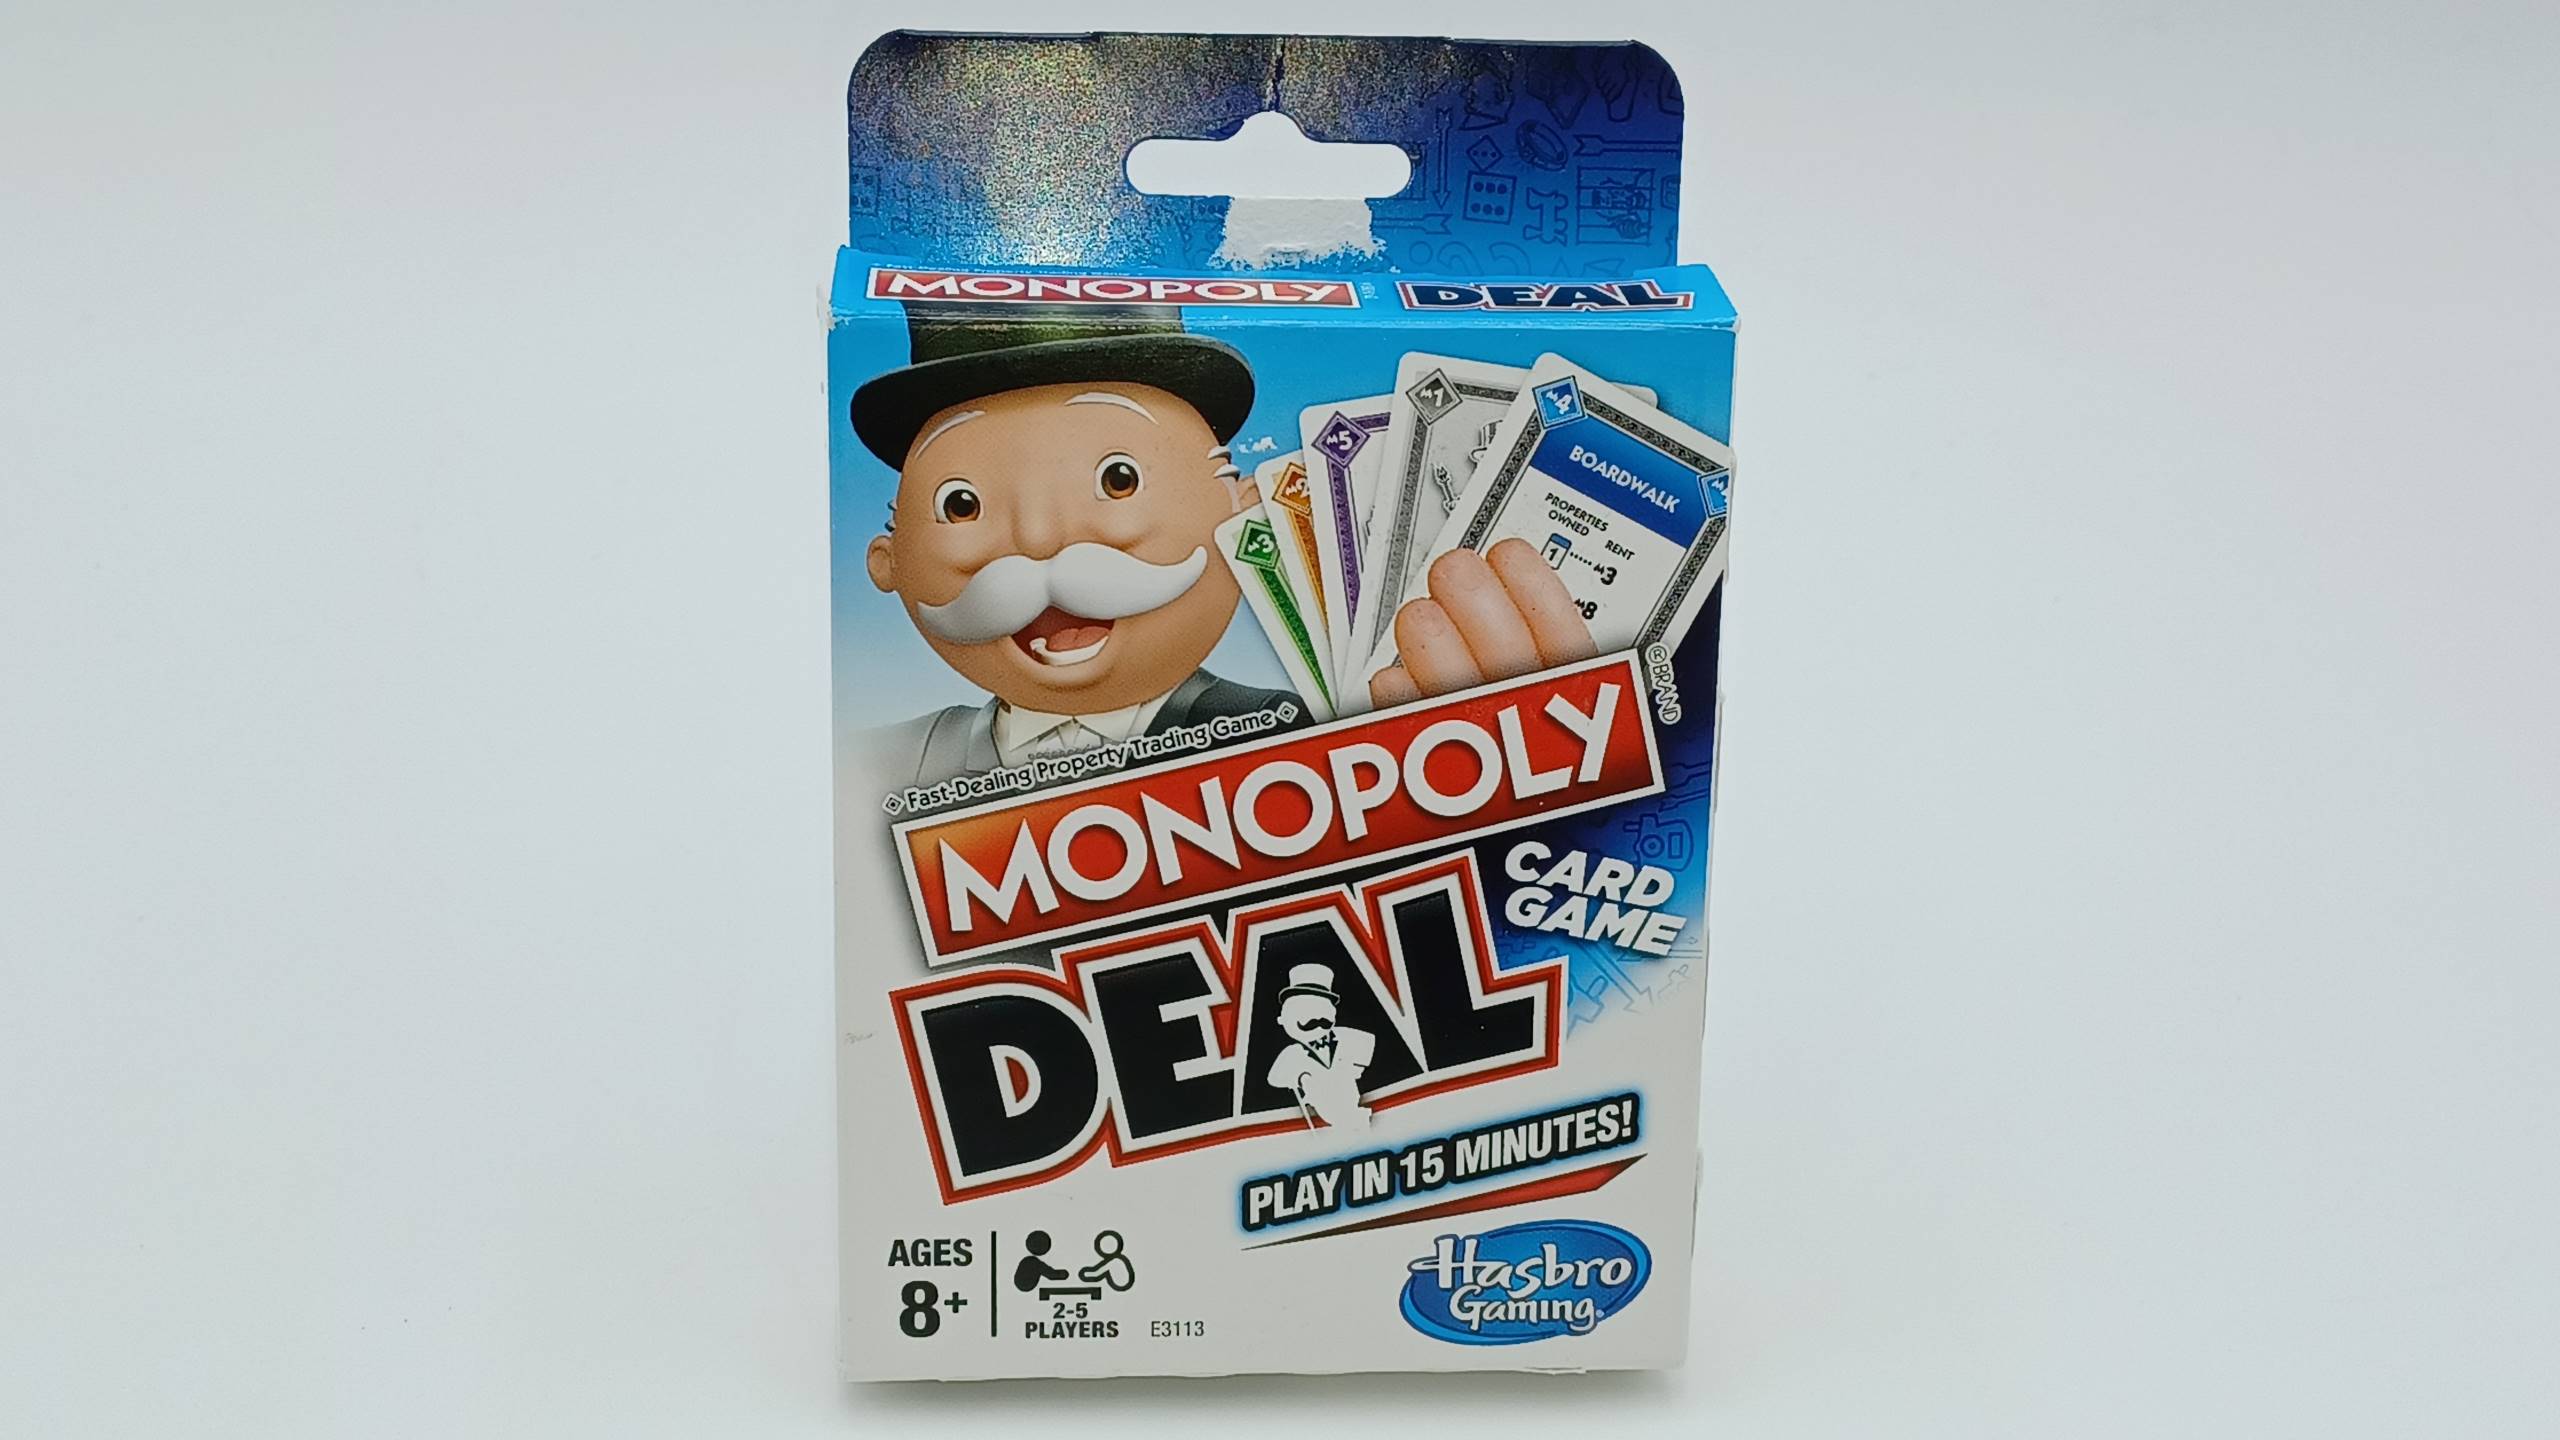 Monopoly Deal Card Game - Hasbro: How-to-Videos